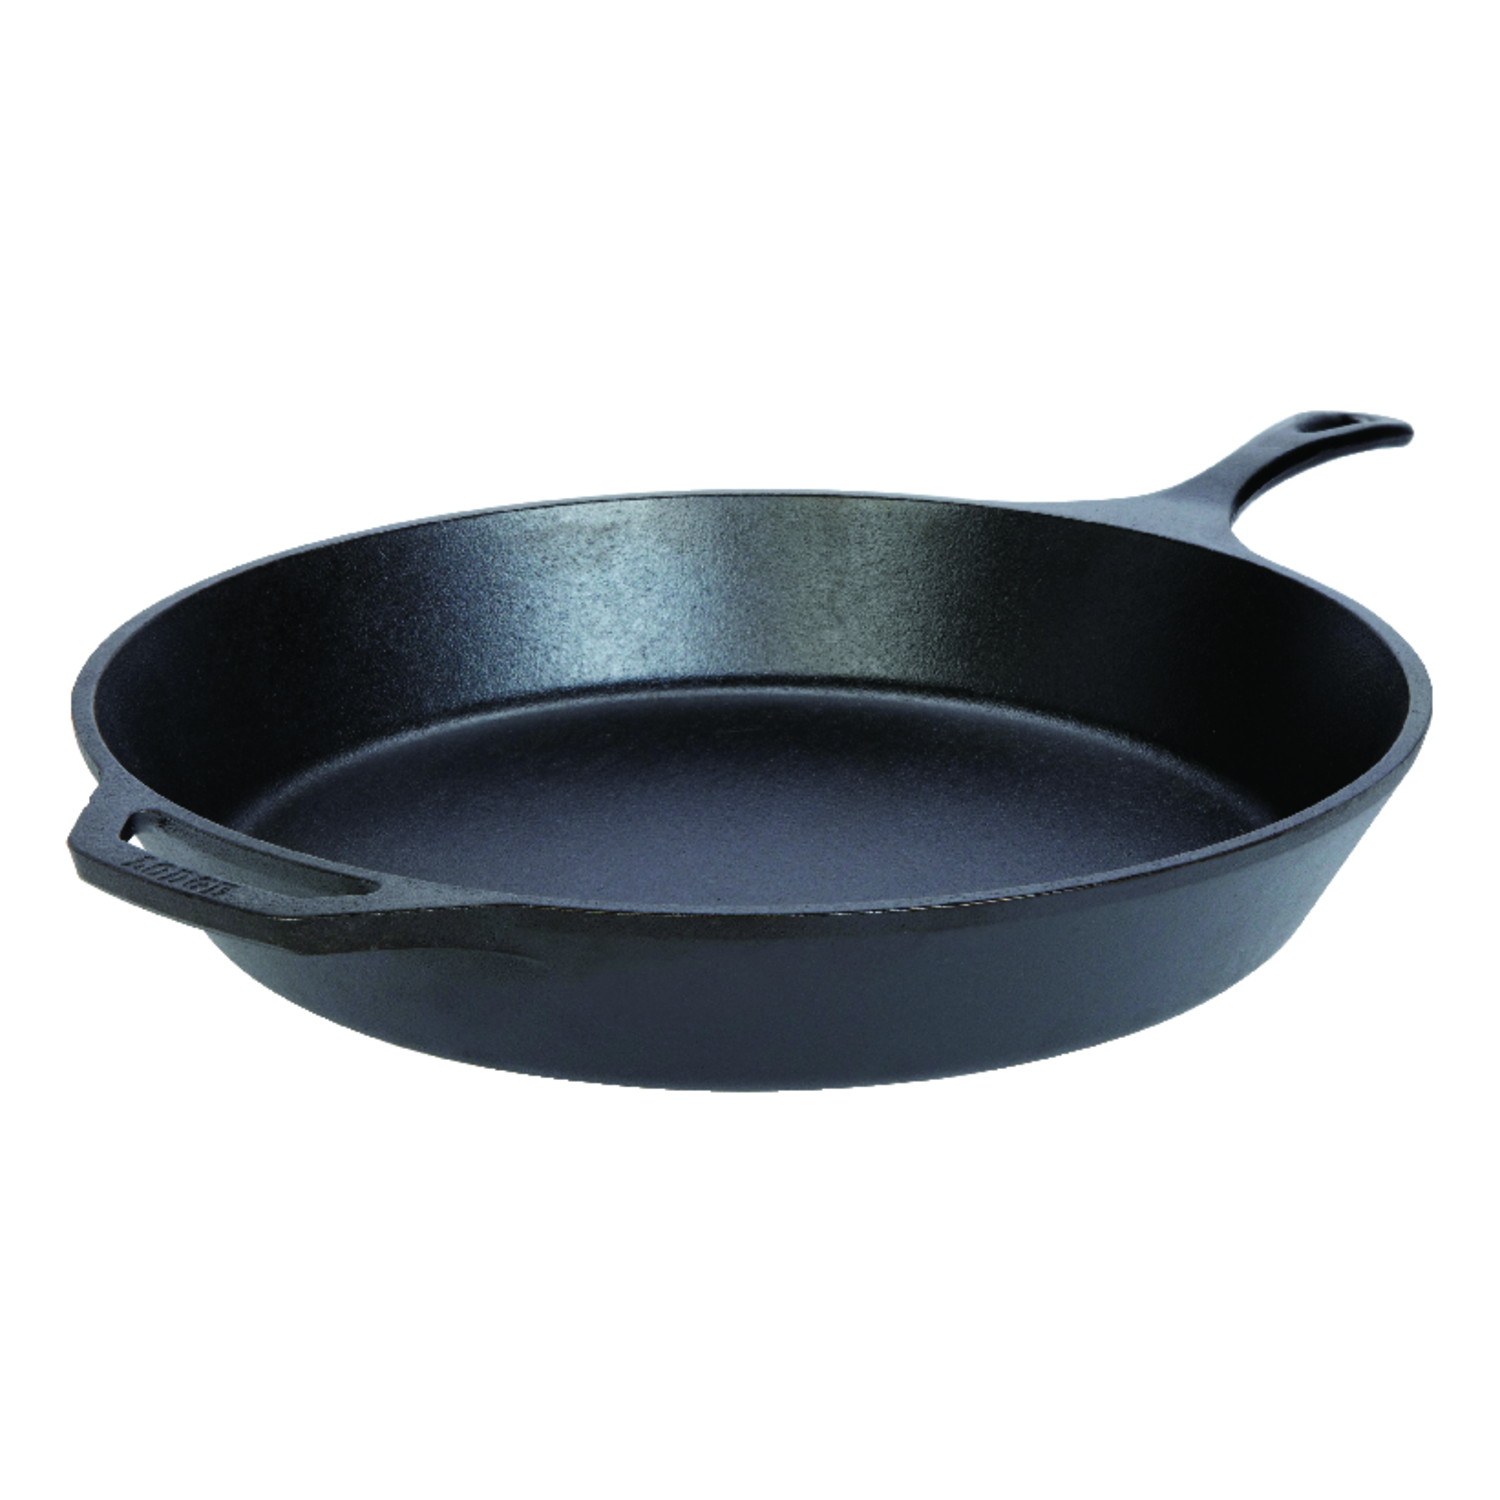 The Rock 12 Inch x 15 Inch 1200 Watt Extra Large Electric Skillet